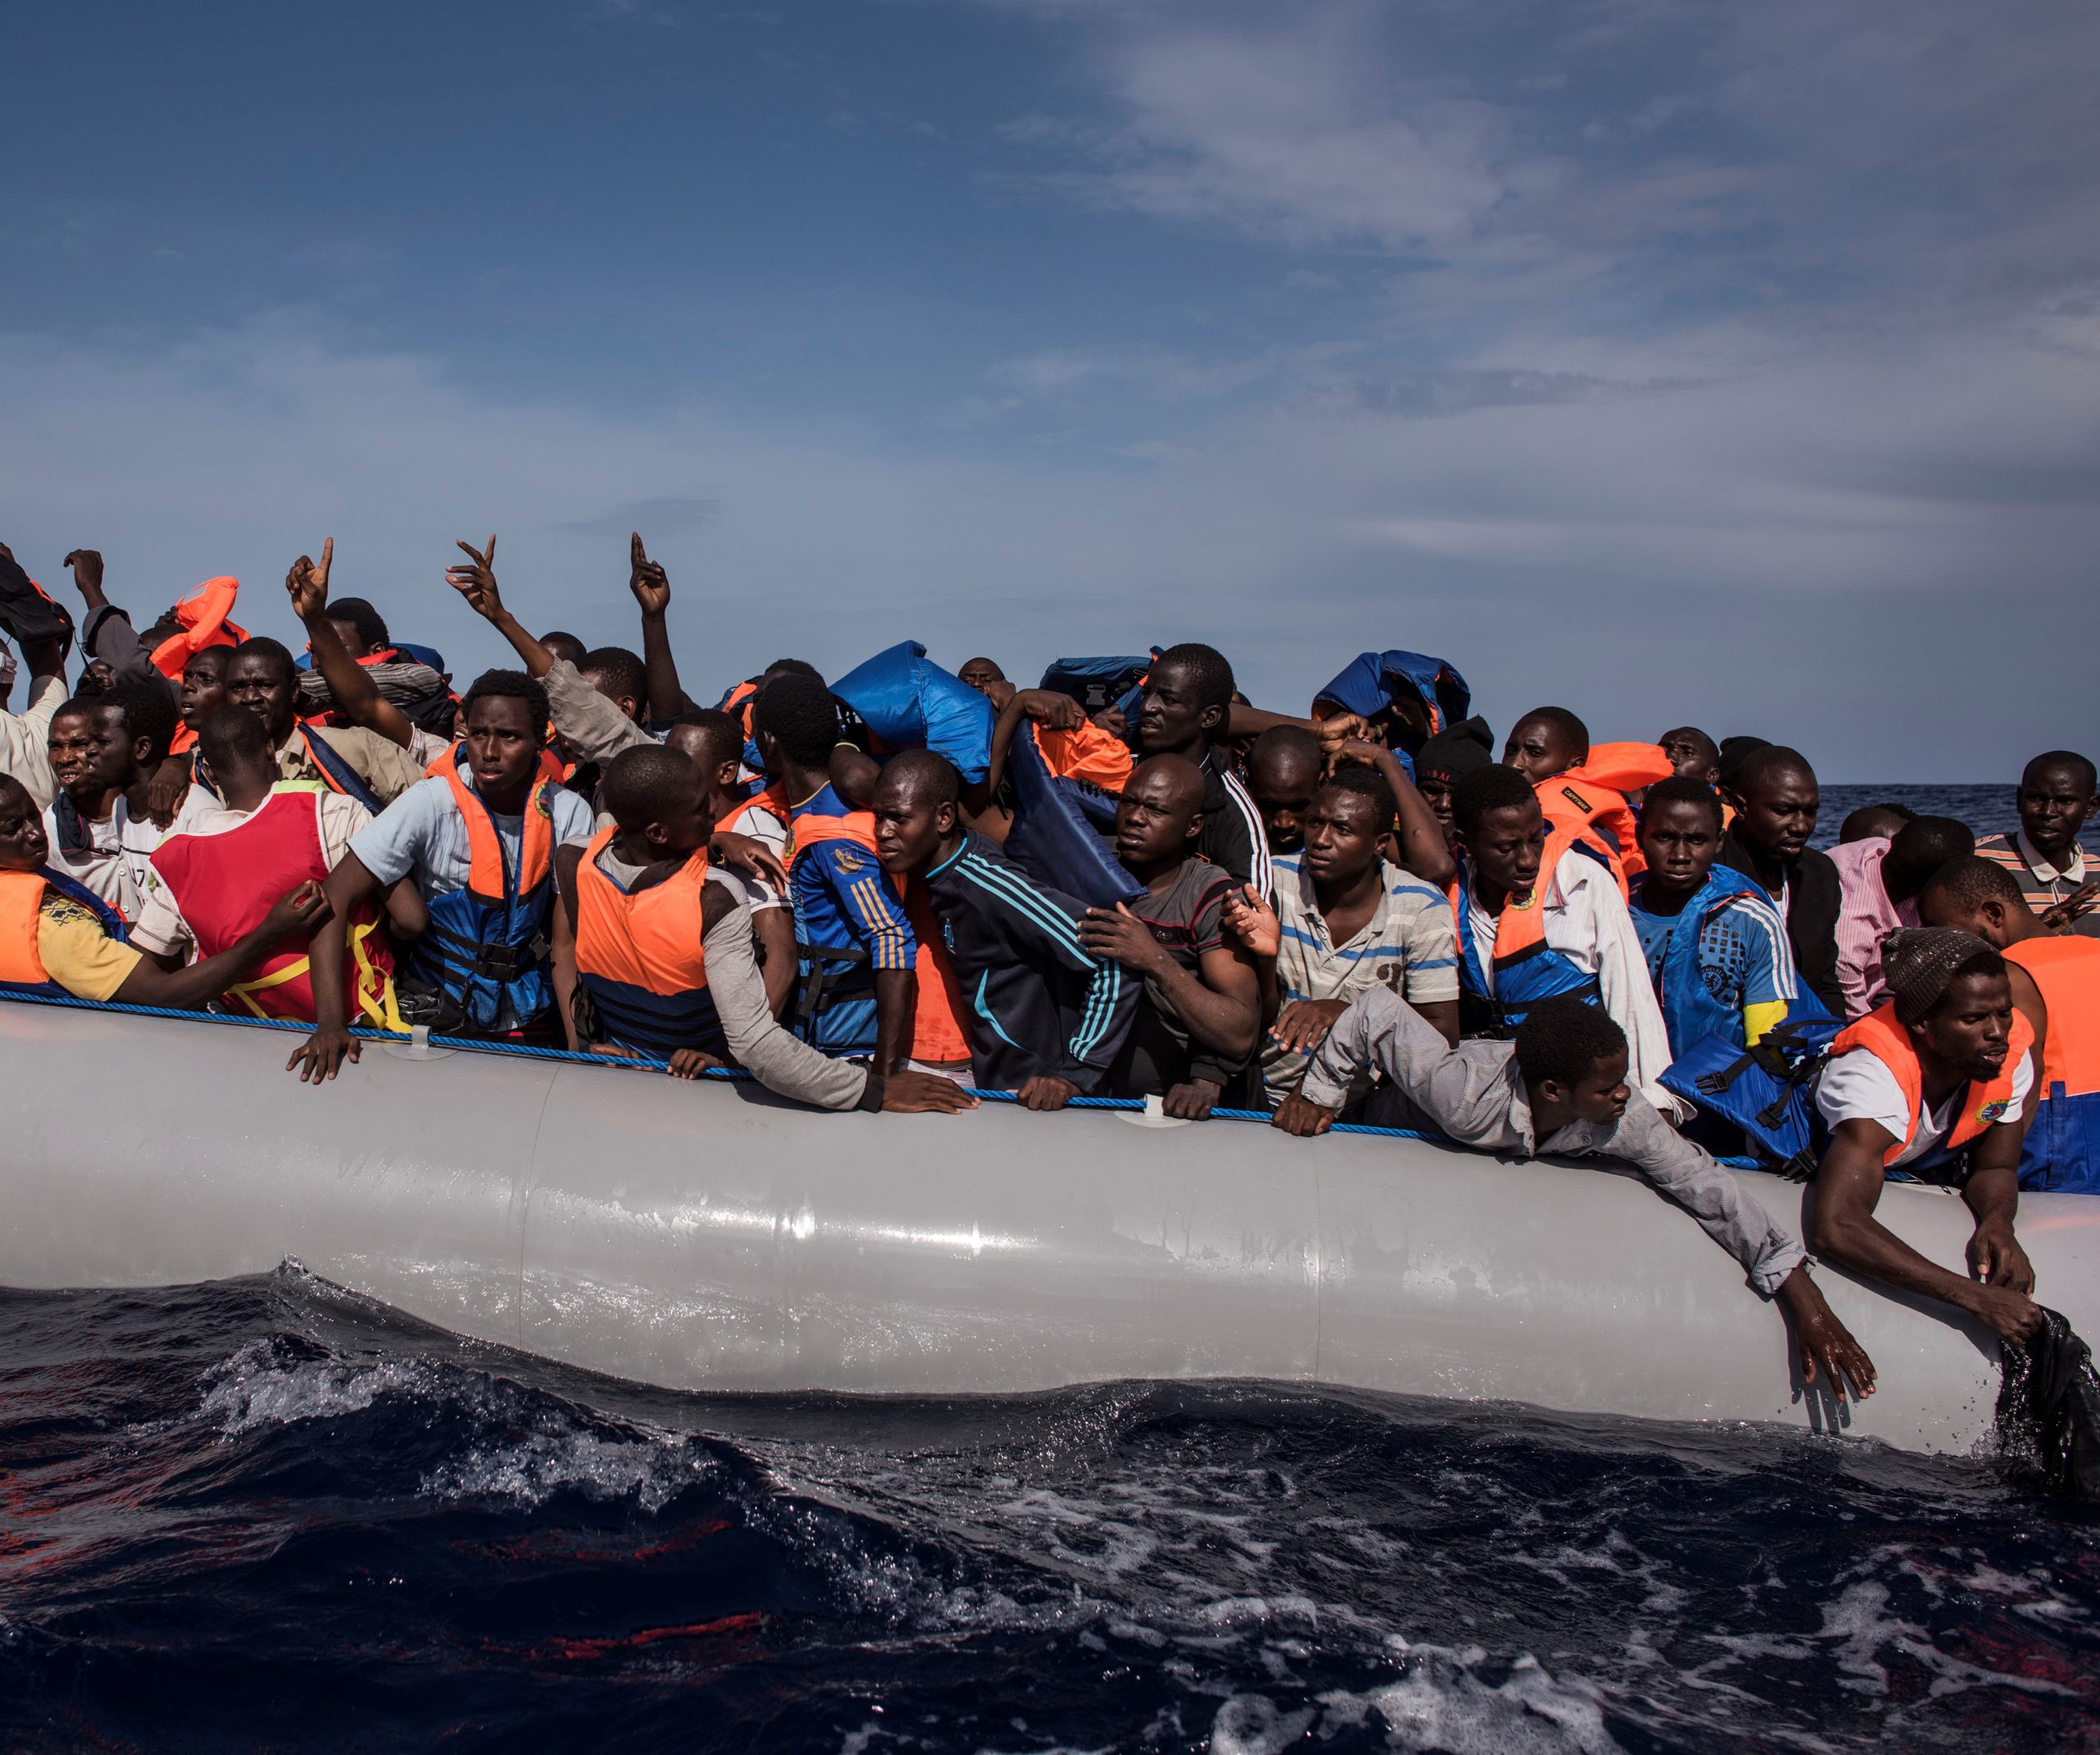 About 50 South Sudanese refugees die at Mediterranean Sea